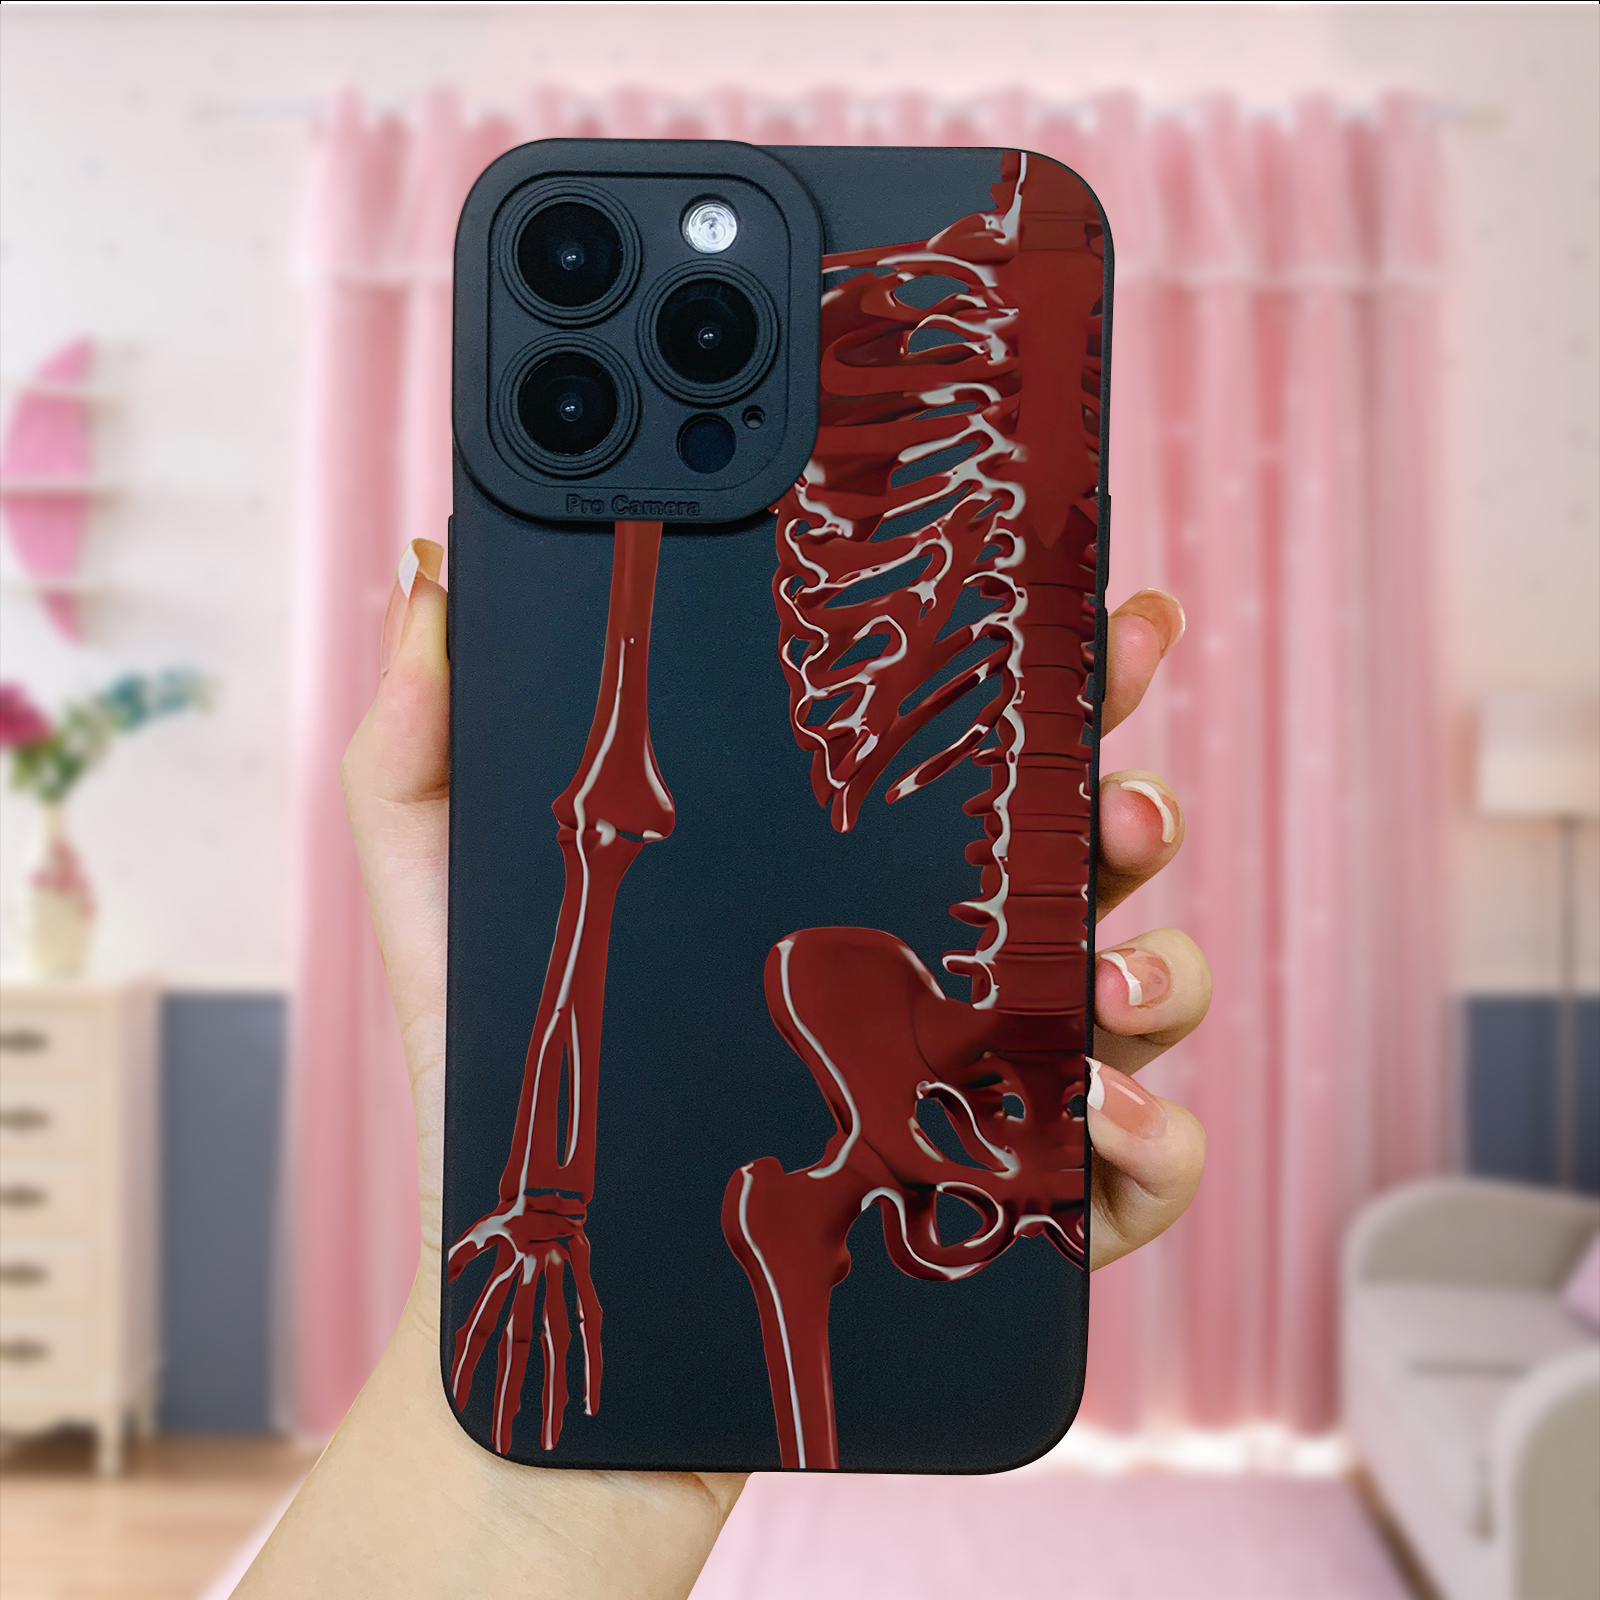 

Red Bone Graphic Printed Phone Case For Iphone 14 13 12 11 X Xr Xs 8 7 Mini Plus Pro Max Se, Gift For Easter Day, Christmas Halloween Deco/ Gift For Girlfriend, Boyfriend, Friend Or Yourself